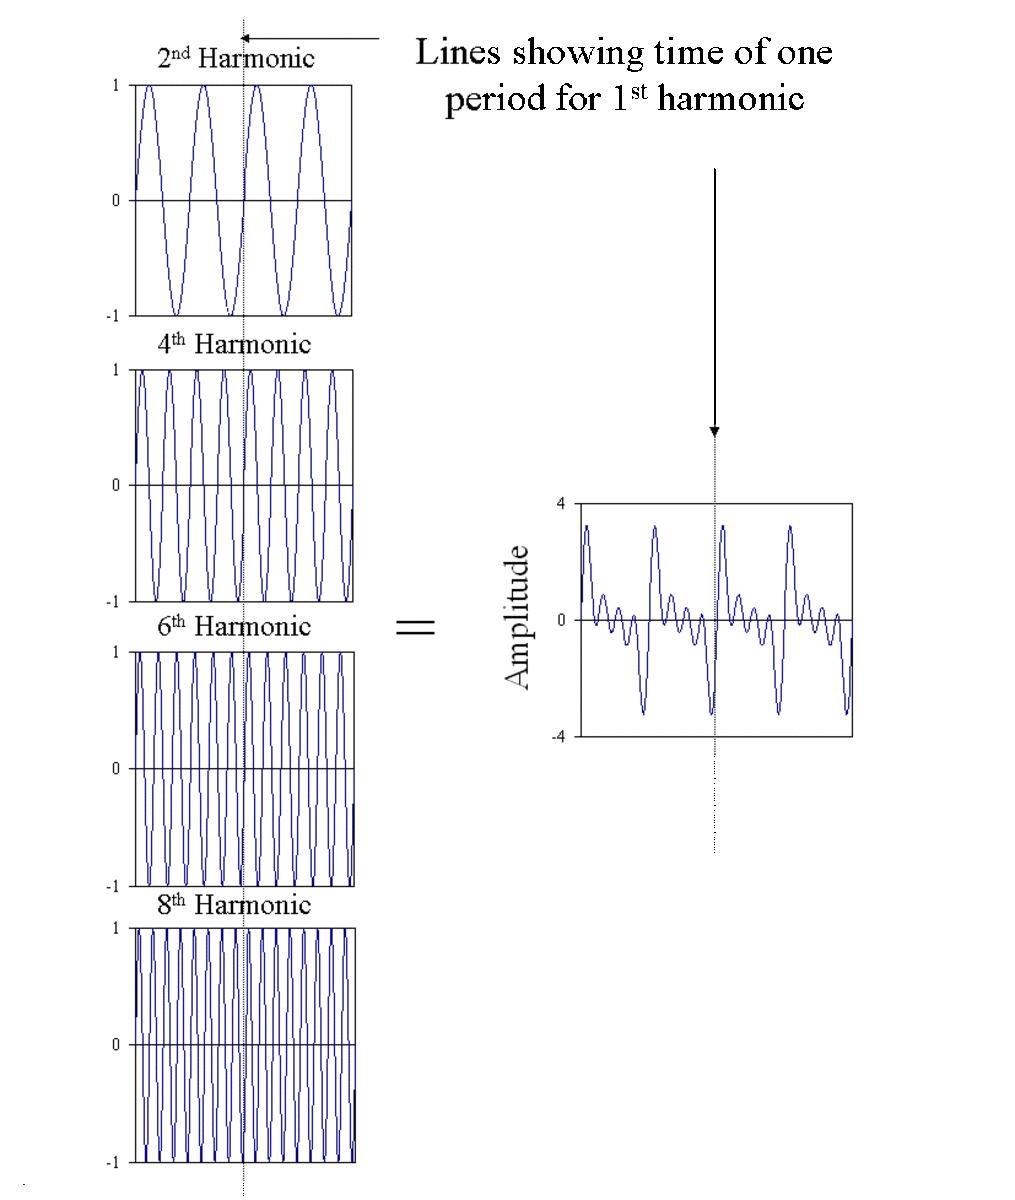 These graphs show the even harmonics up to the eighth and the result of adding them together.